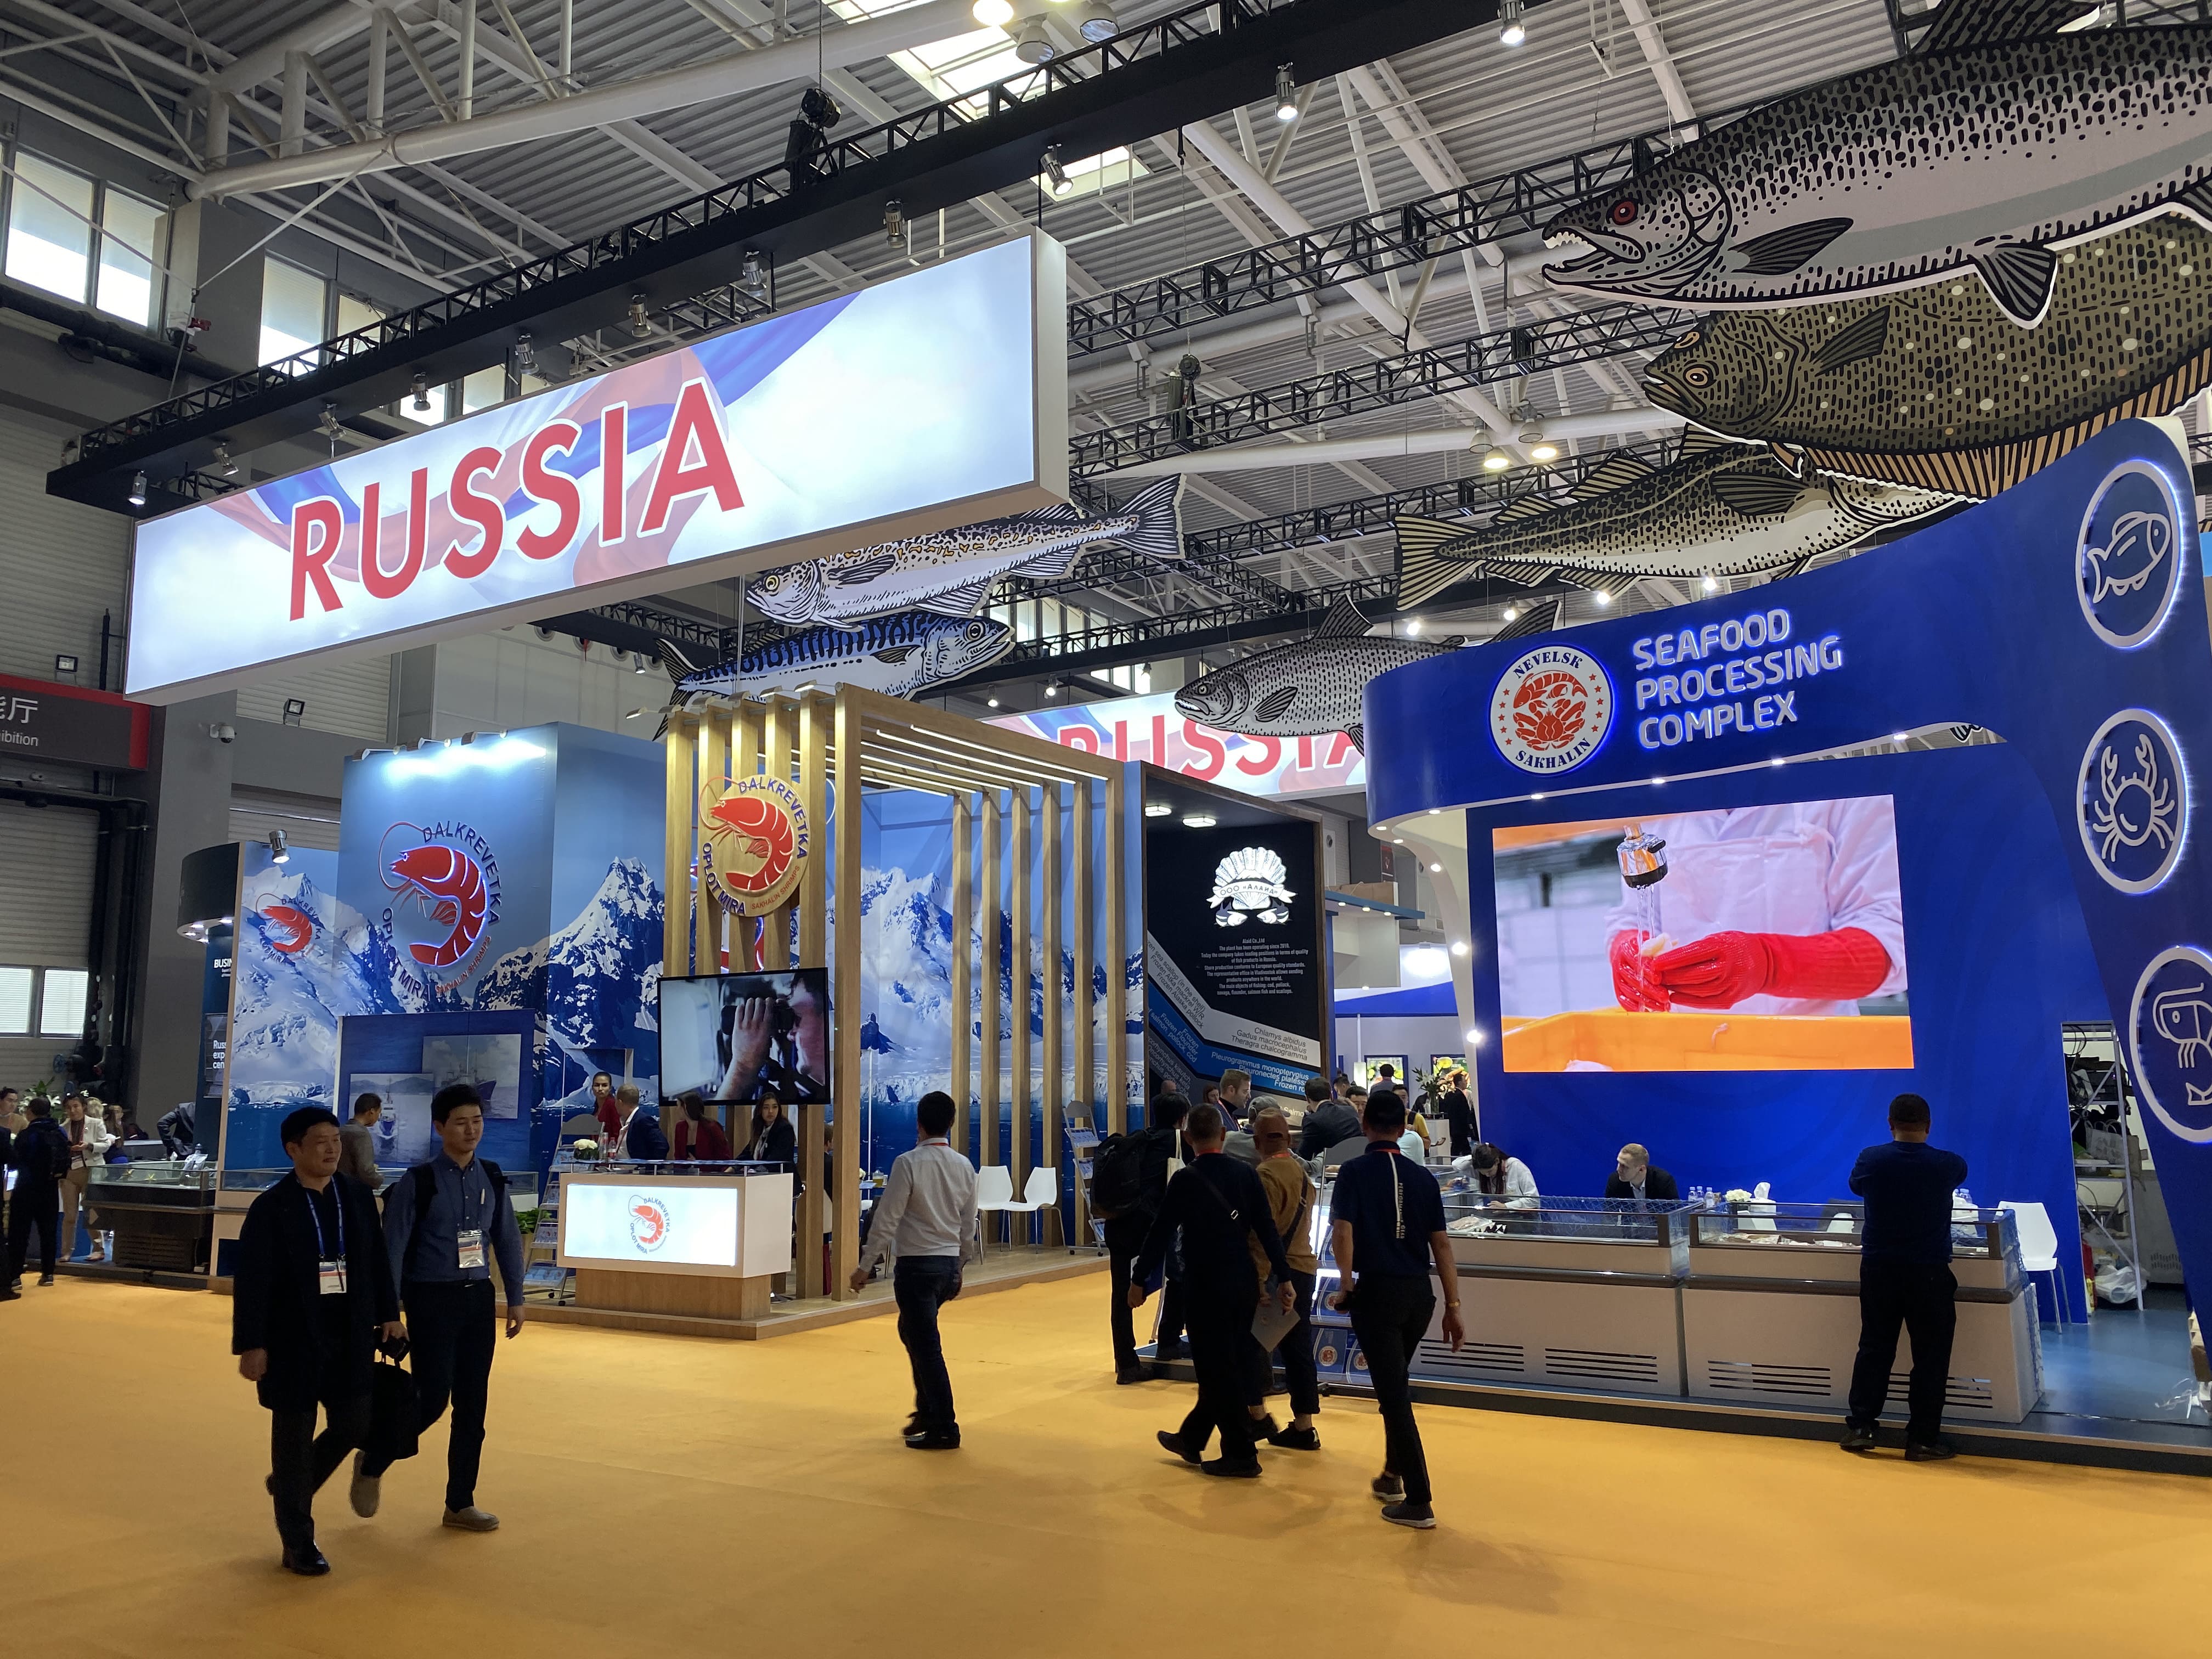 CHINA FISHERIES & SEAFOOD EXPO: The record size of the Russian pavilion